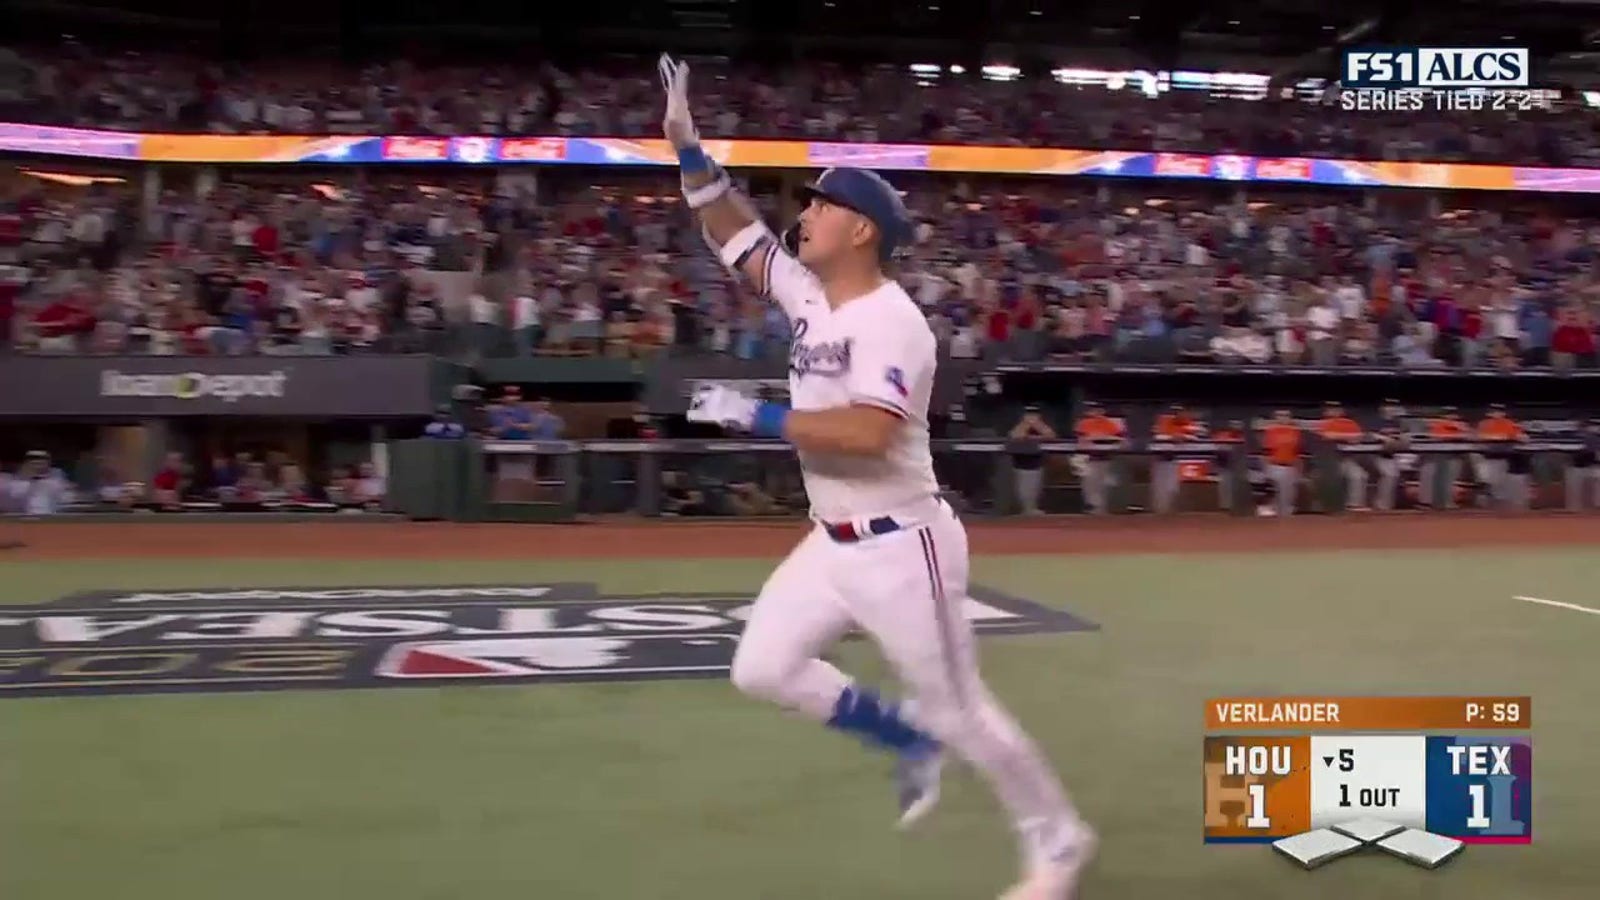 Rangers' Nathaniel Lowe CRUSHES a solo home run to tie game against Astros